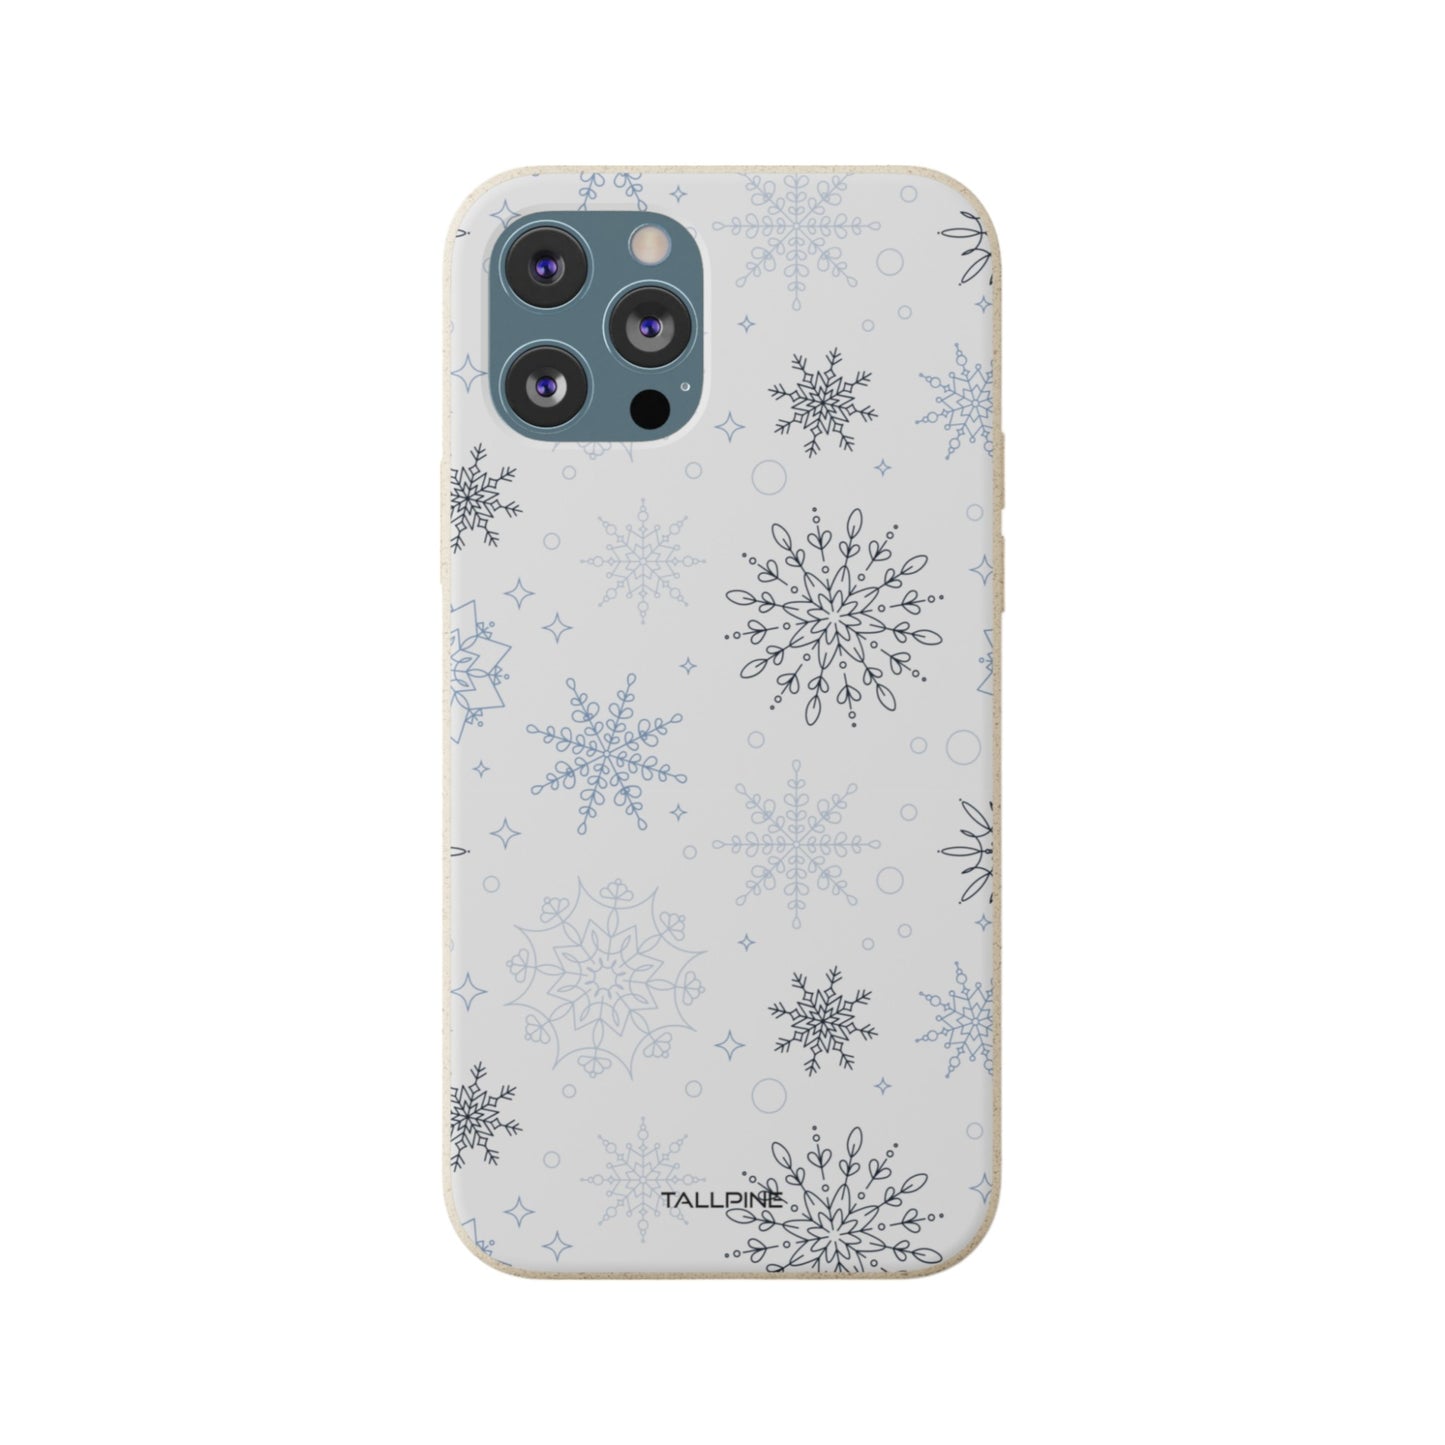 Winter Daybreak - Eco Case iPhone 12 Pro Max - Tallpine Cases | Sustainable and Eco-Friendly - Abstract New